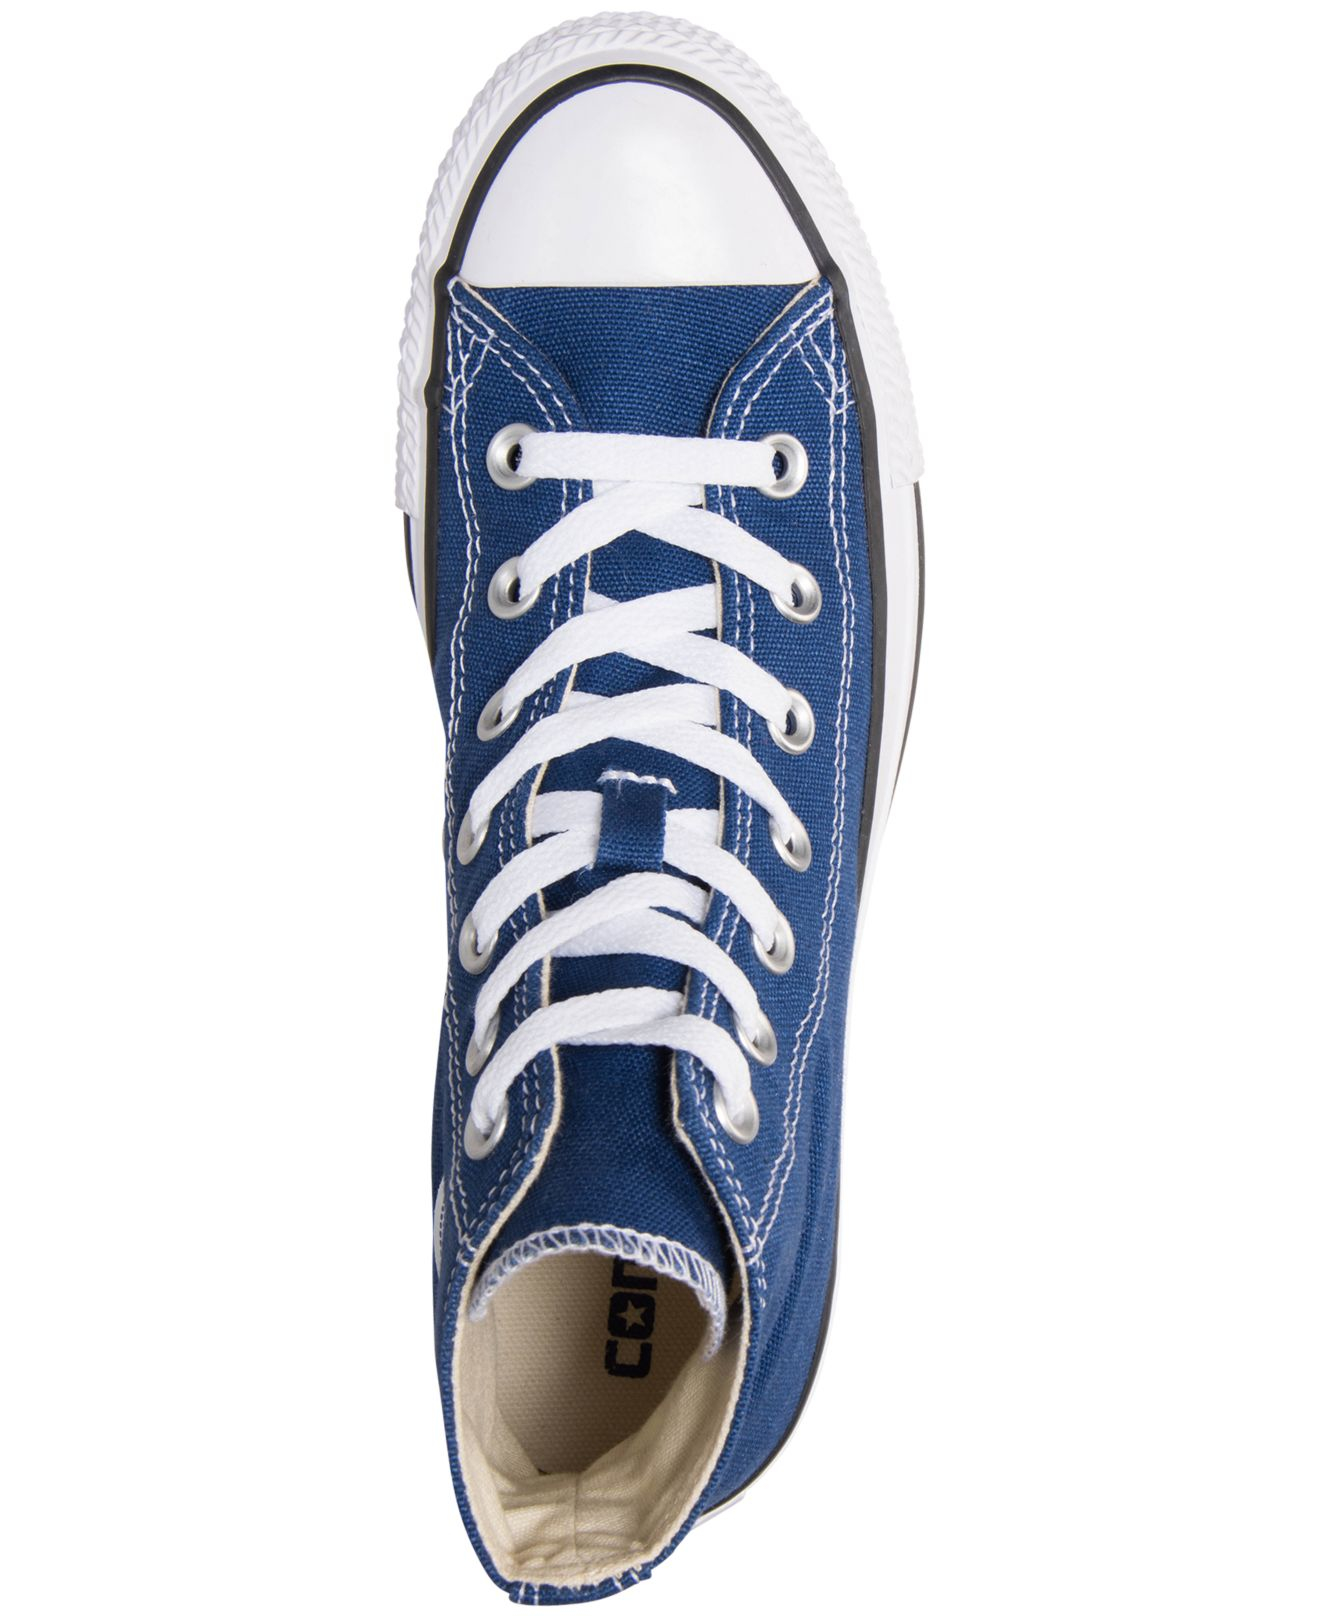 Lyst - Converse Women's Chuck Taylor Hi Casual Sneakers From Finish ...